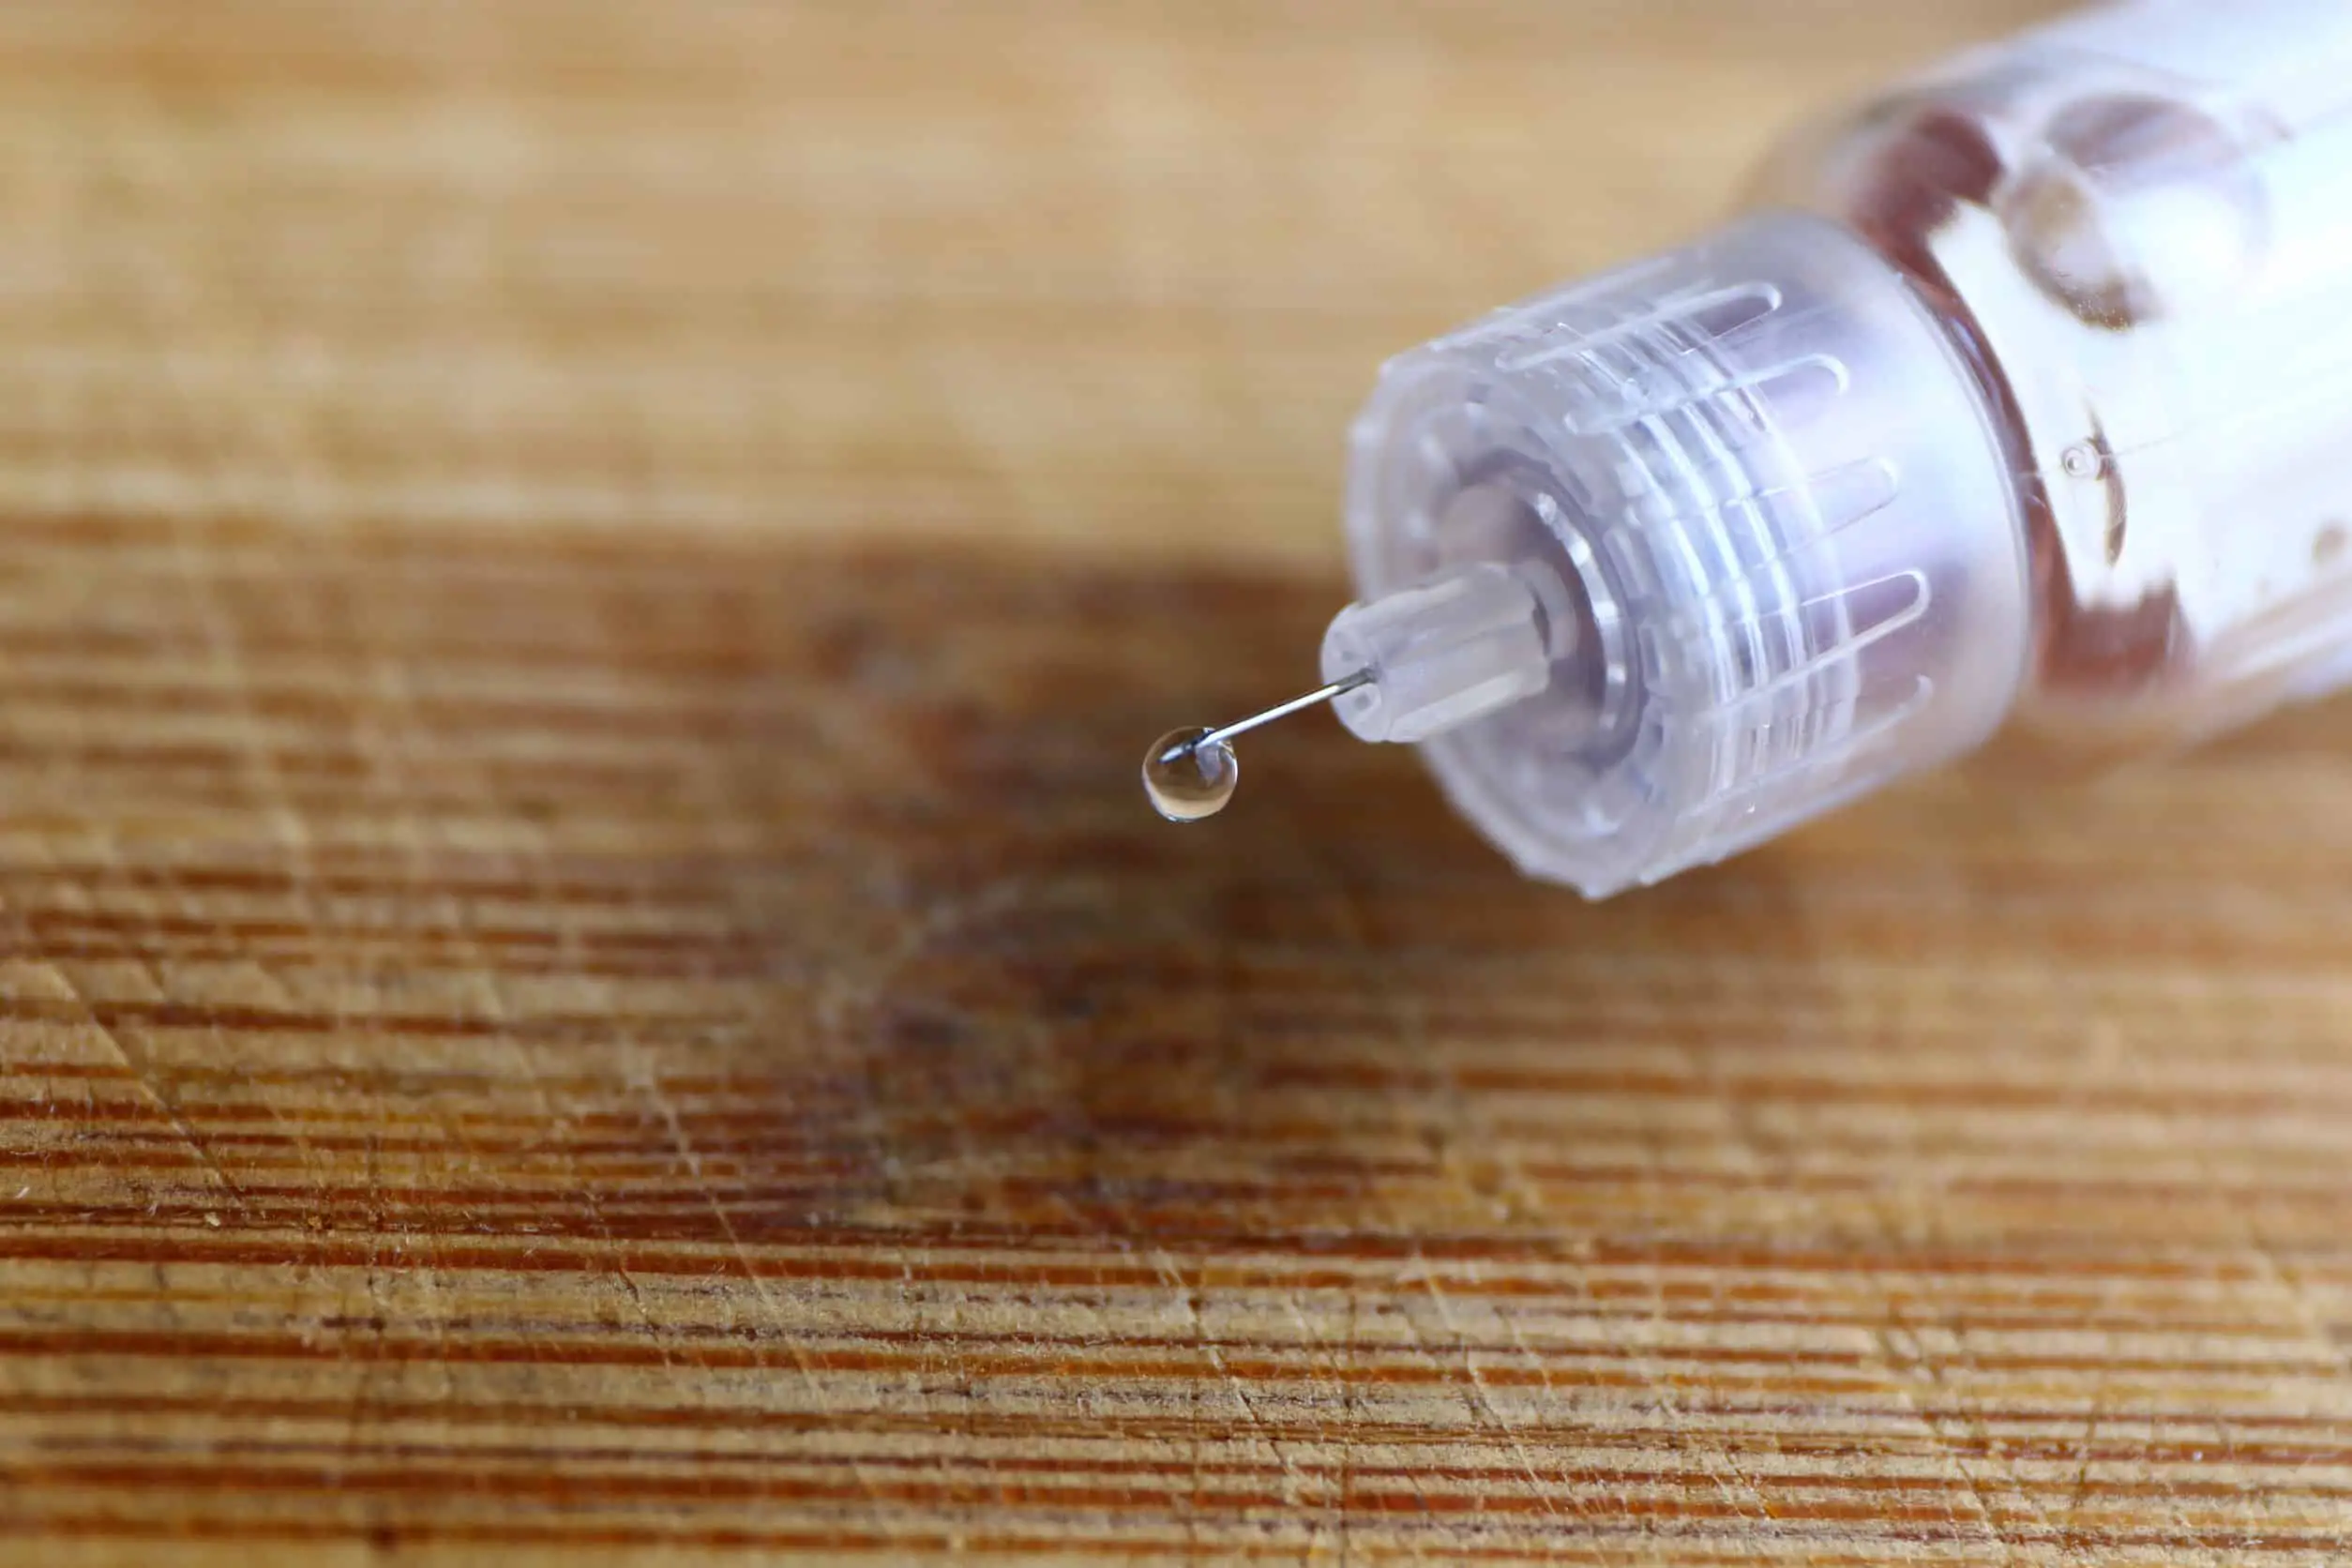 How to Sterilize a Needle: Don’t Miss these 3 Essential Ways to Do It